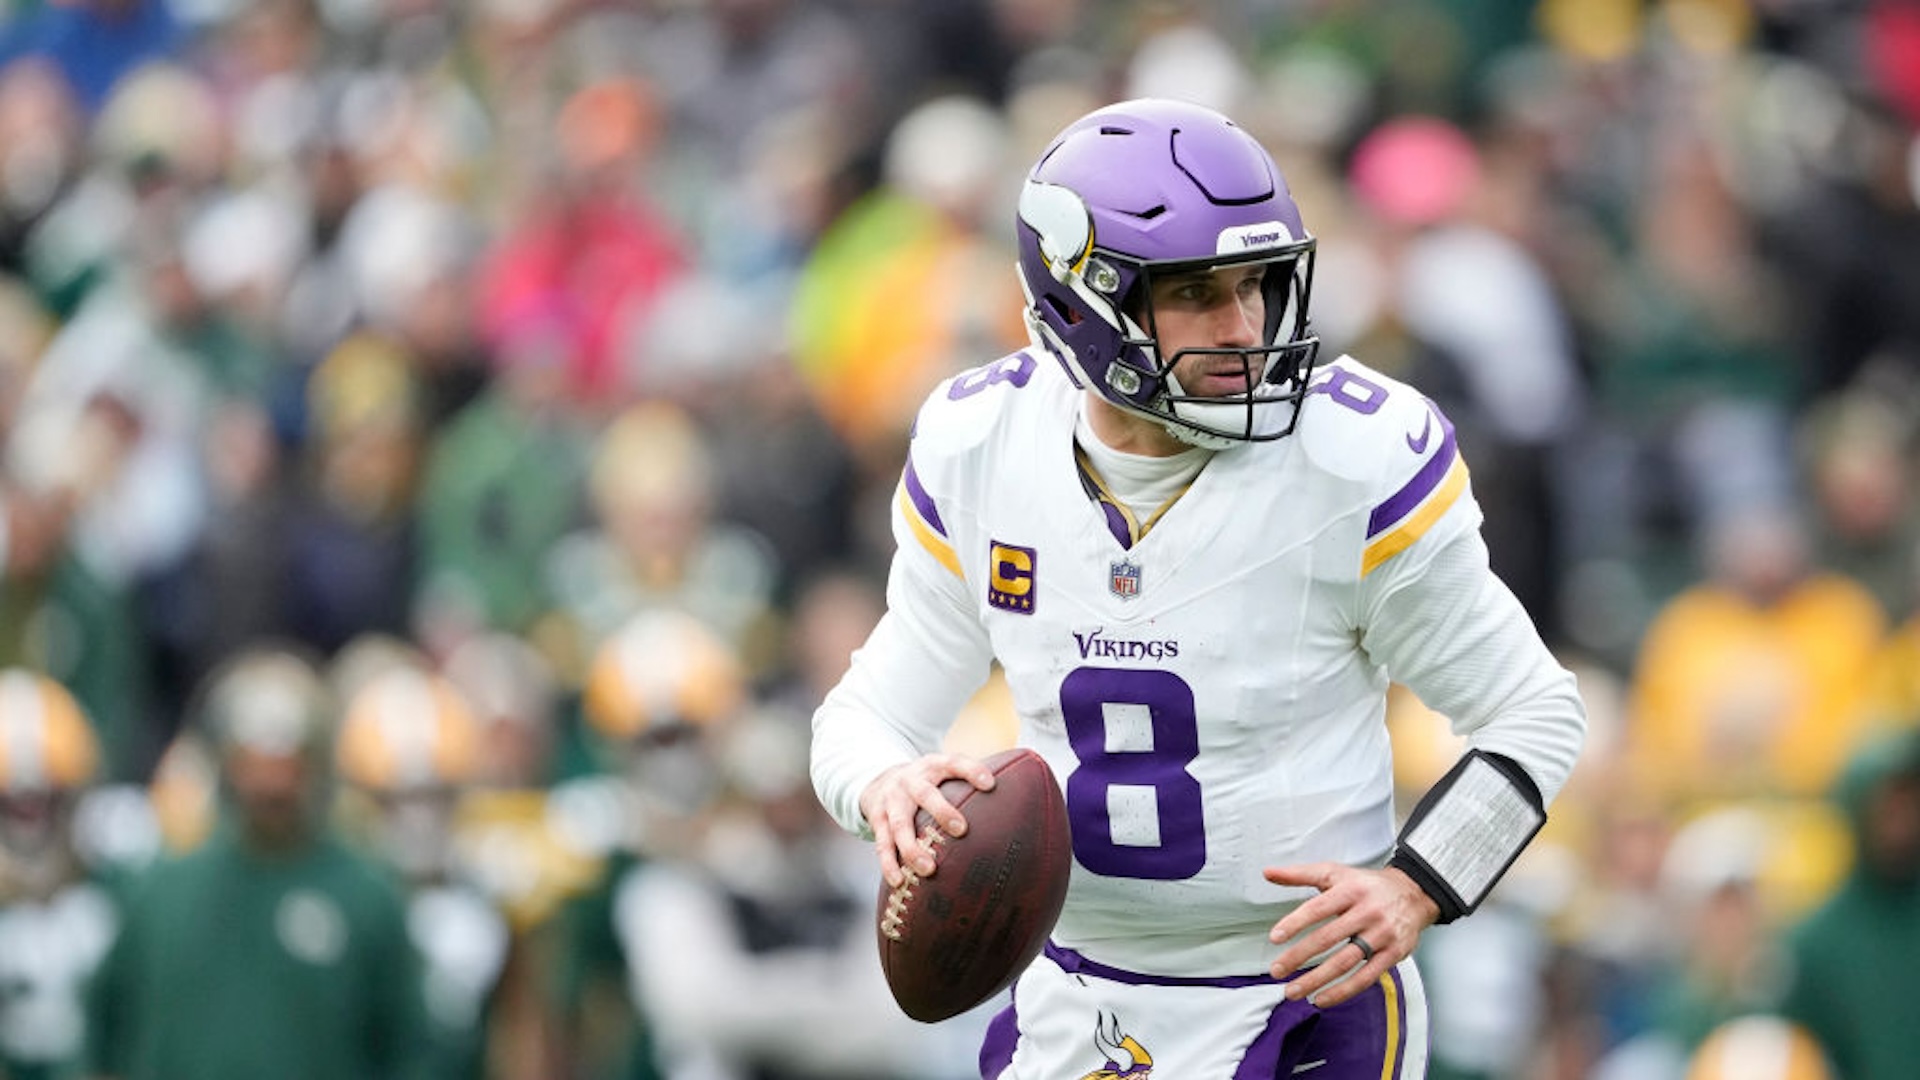 Kirk Cousins #8 of the Minnesota Vikings looks to throw a pass against the Green Bay Packers in the second half at Lambeau Field on October 29, 2023 in Green Bay, Wisconsin.